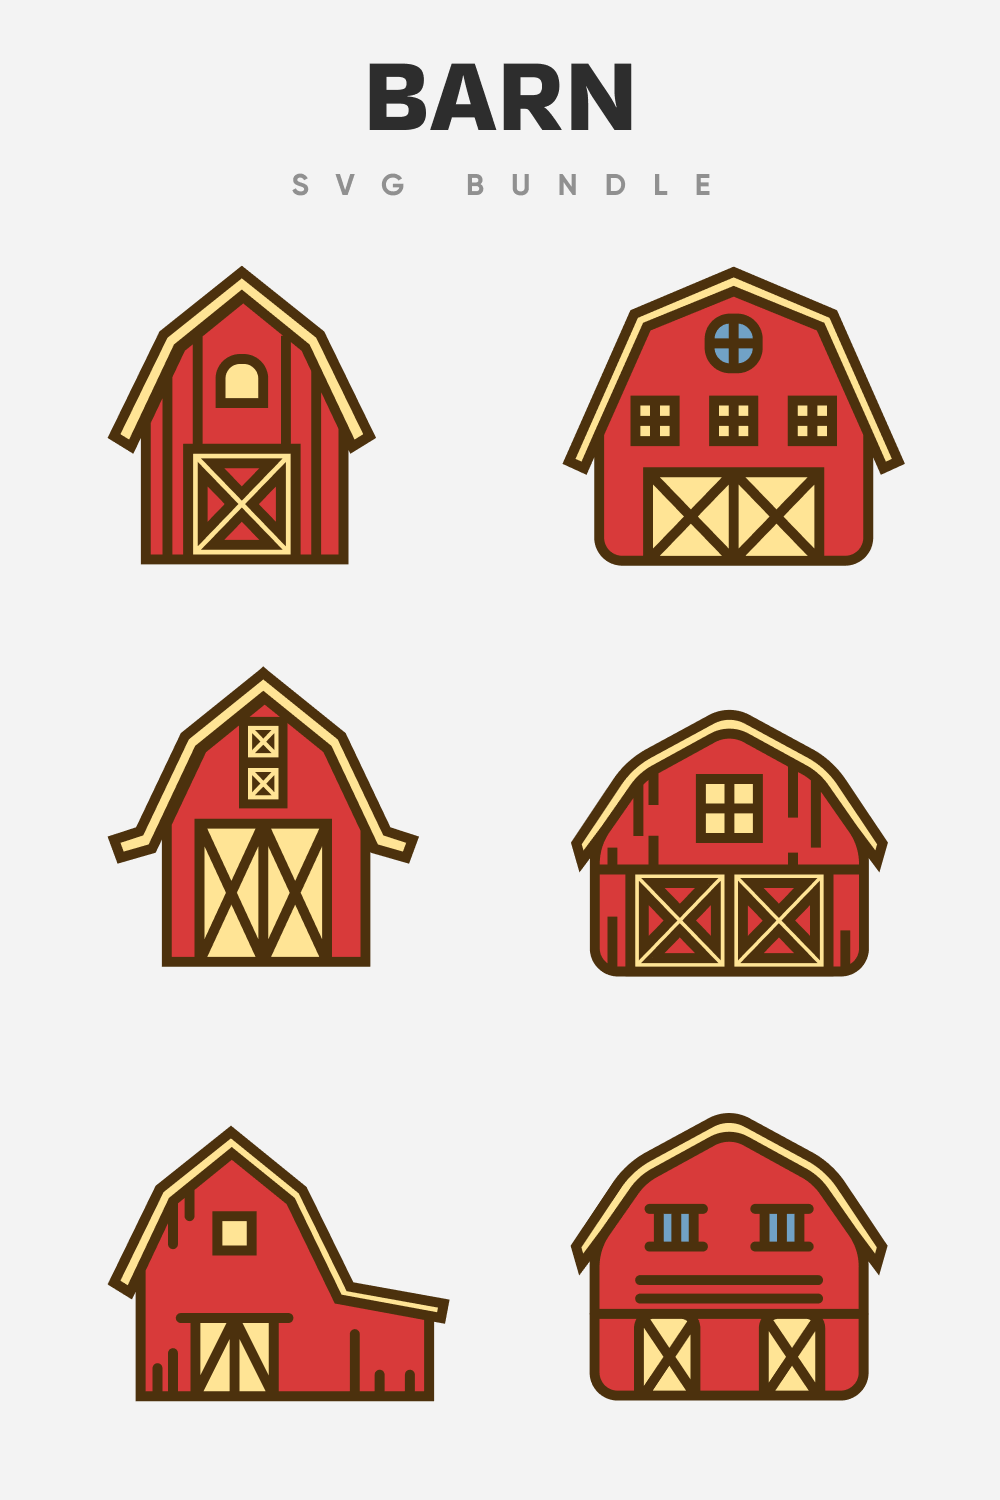 Different configurations of red barn with gates.